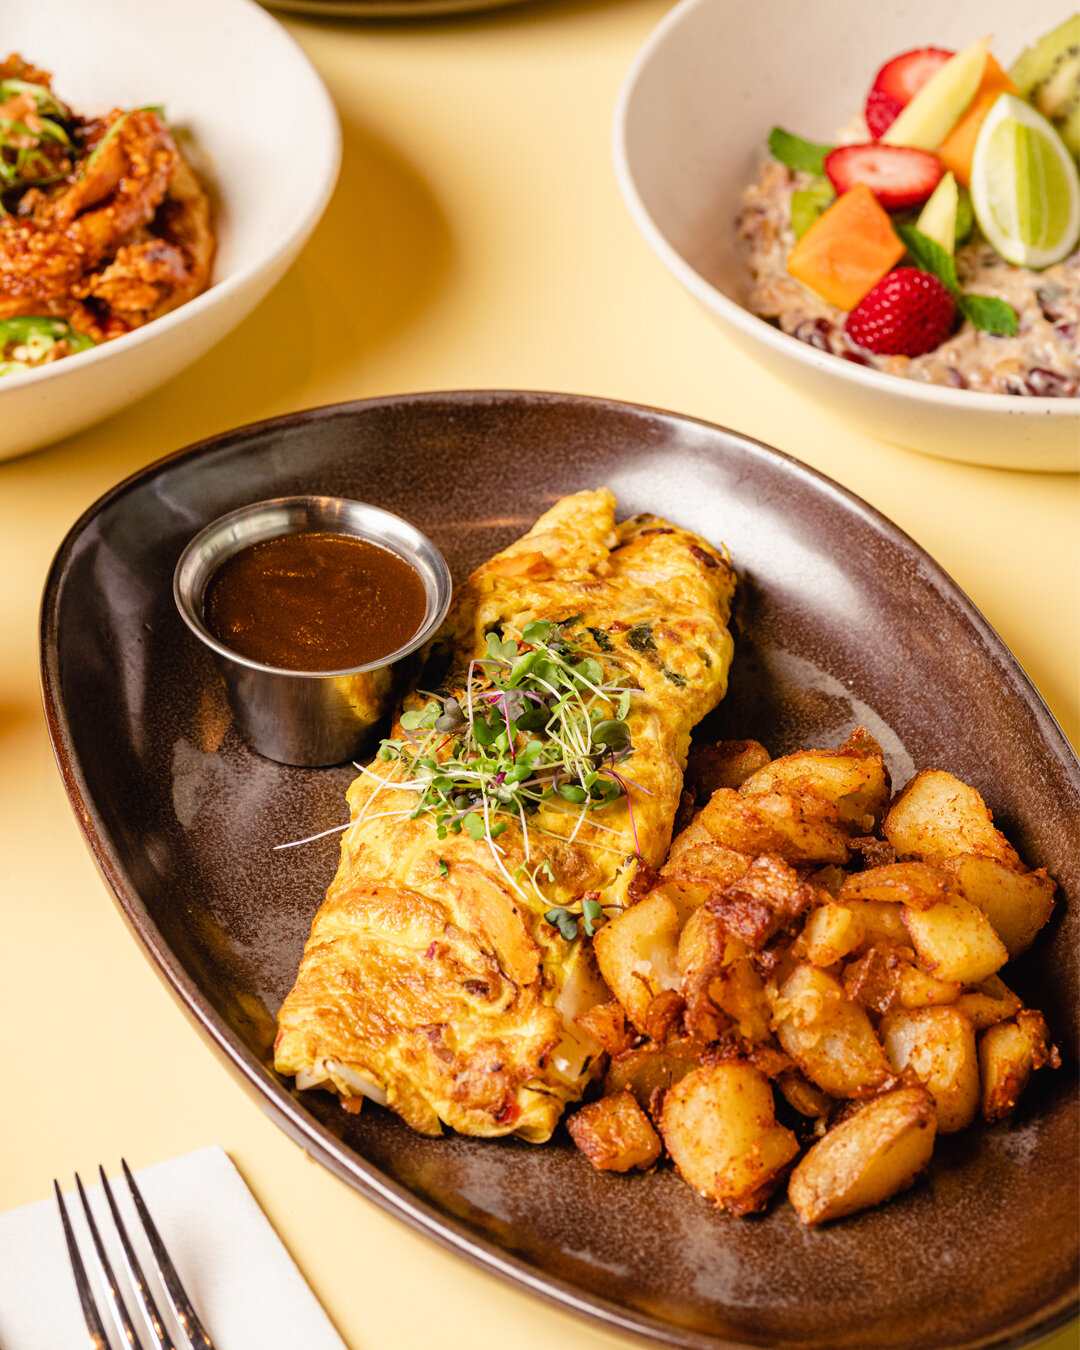 If your brunch dish of choice is an omelet, then you're in luck! Our breakfast menu features two omelets, the Ali`i Mushroom Omelet and the &ldquo;Egg Foo Yung&rdquo; Omelet. Both come with your choice of rice or linguica spiced potatoes.

#MahiaiTab